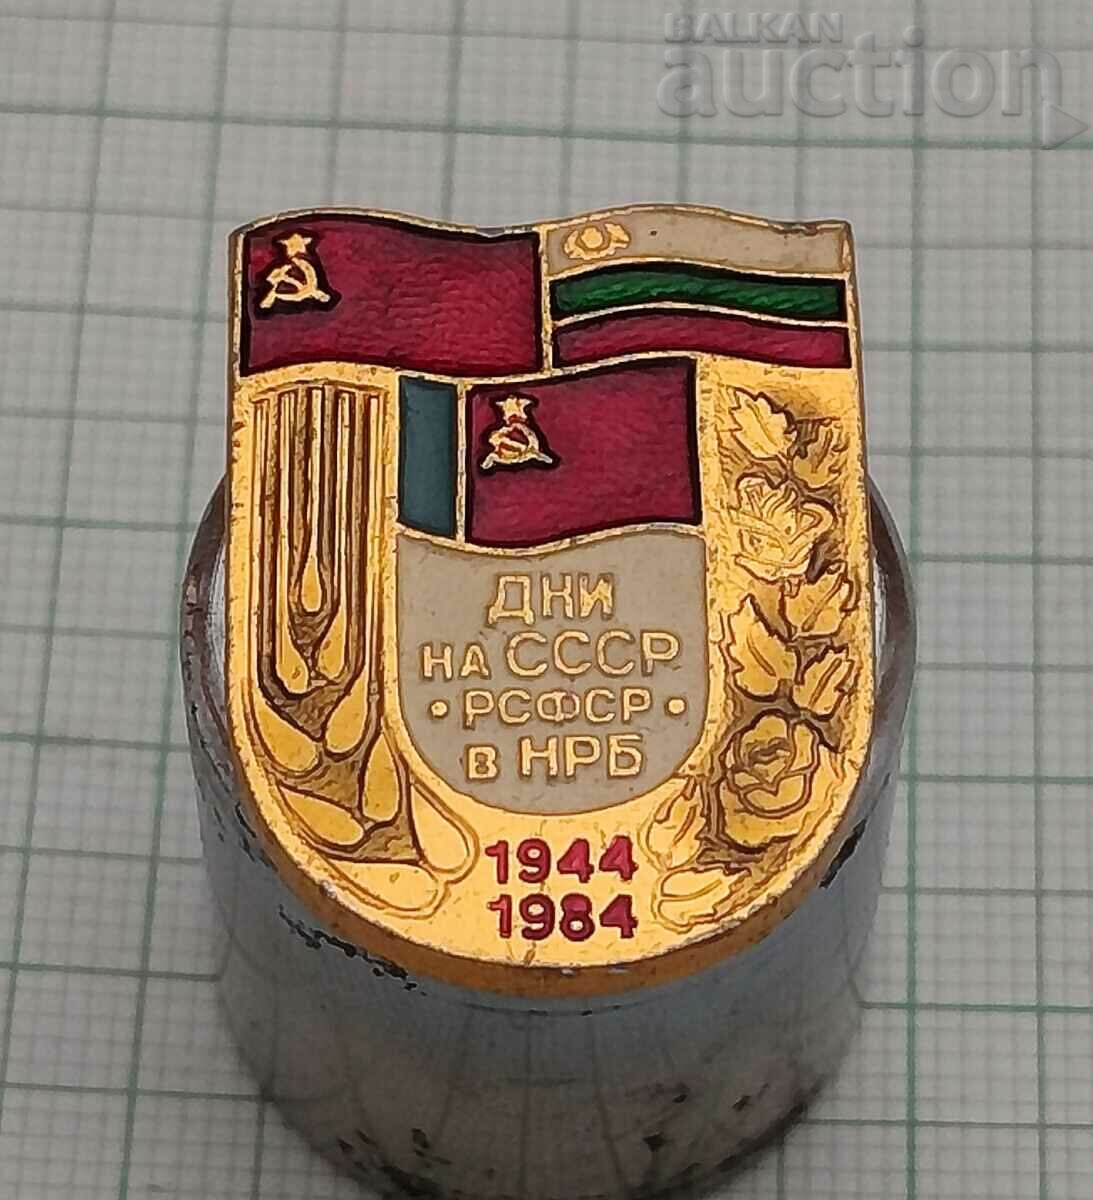 DAYS OF THE USSR IN NRB BADGE